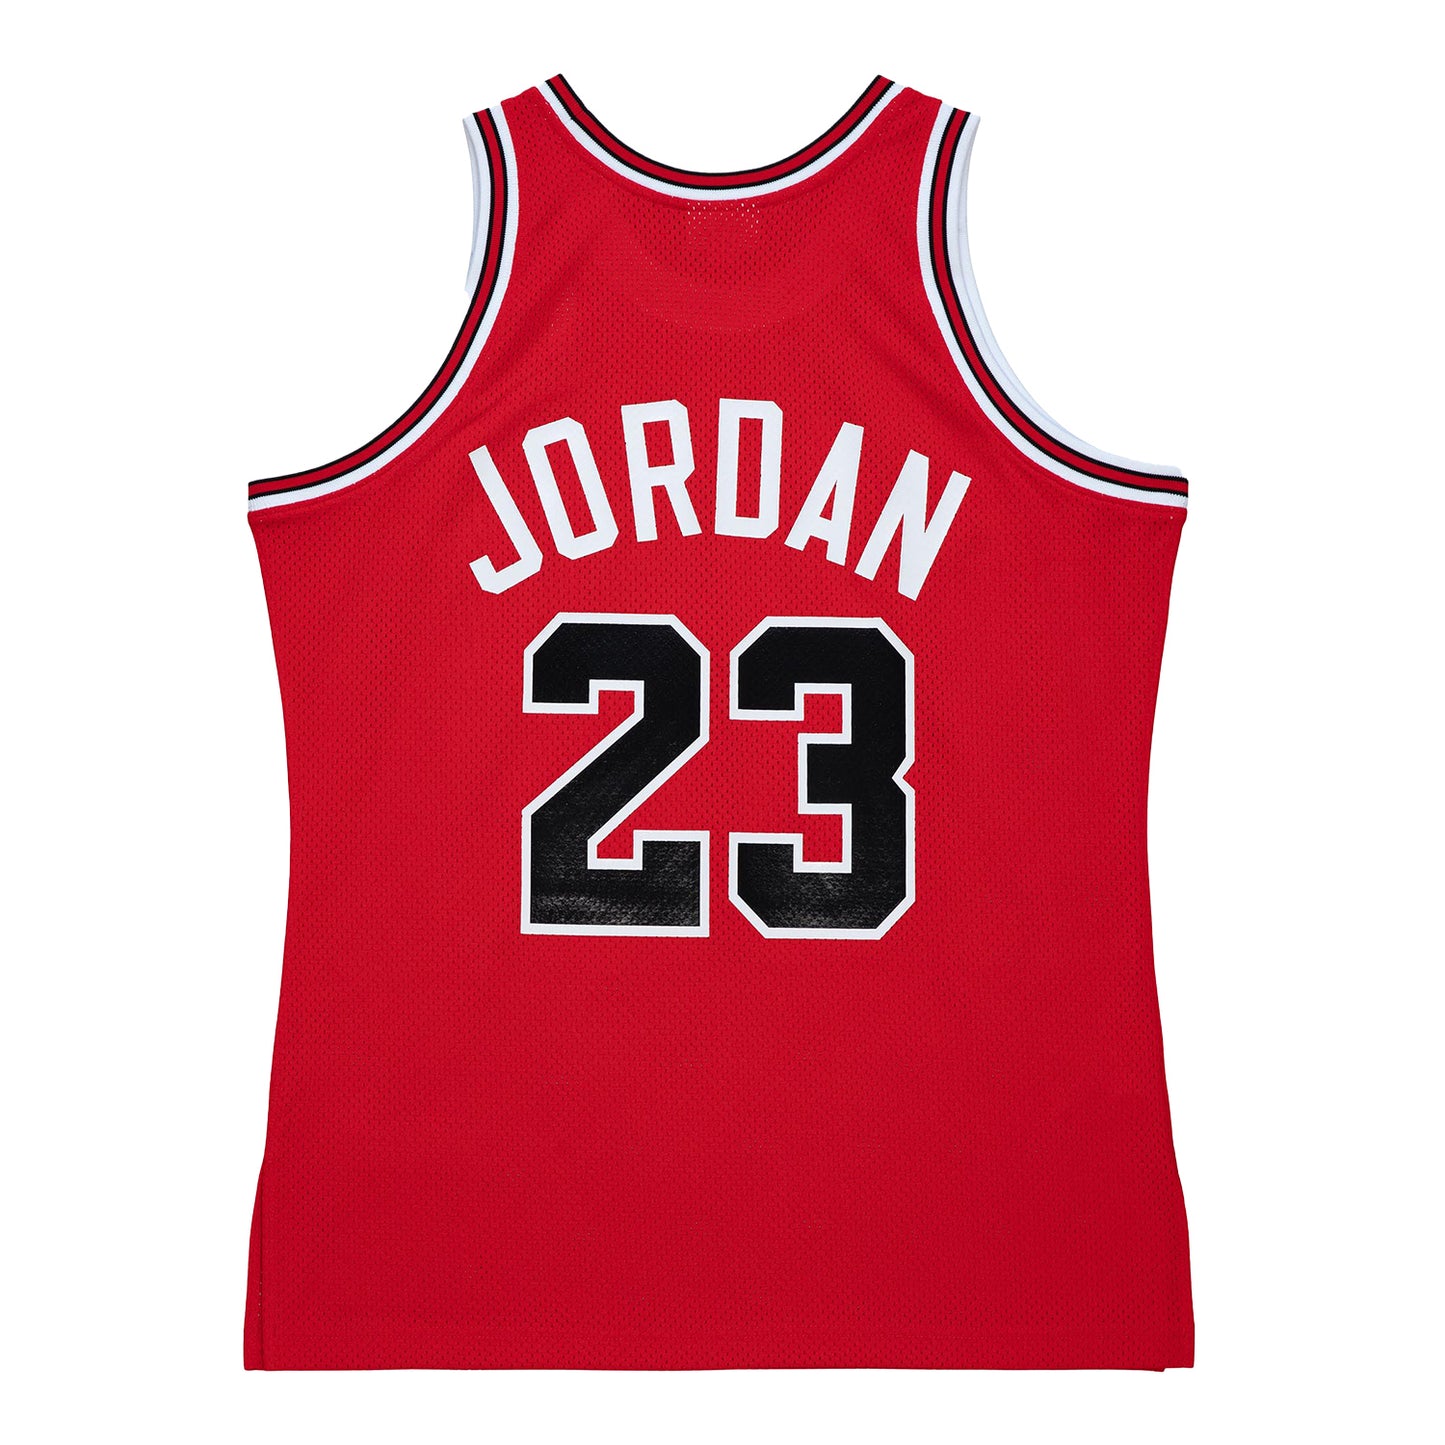 New Nike Michael Jordan Jersey Will Cost You A Small Car Payment